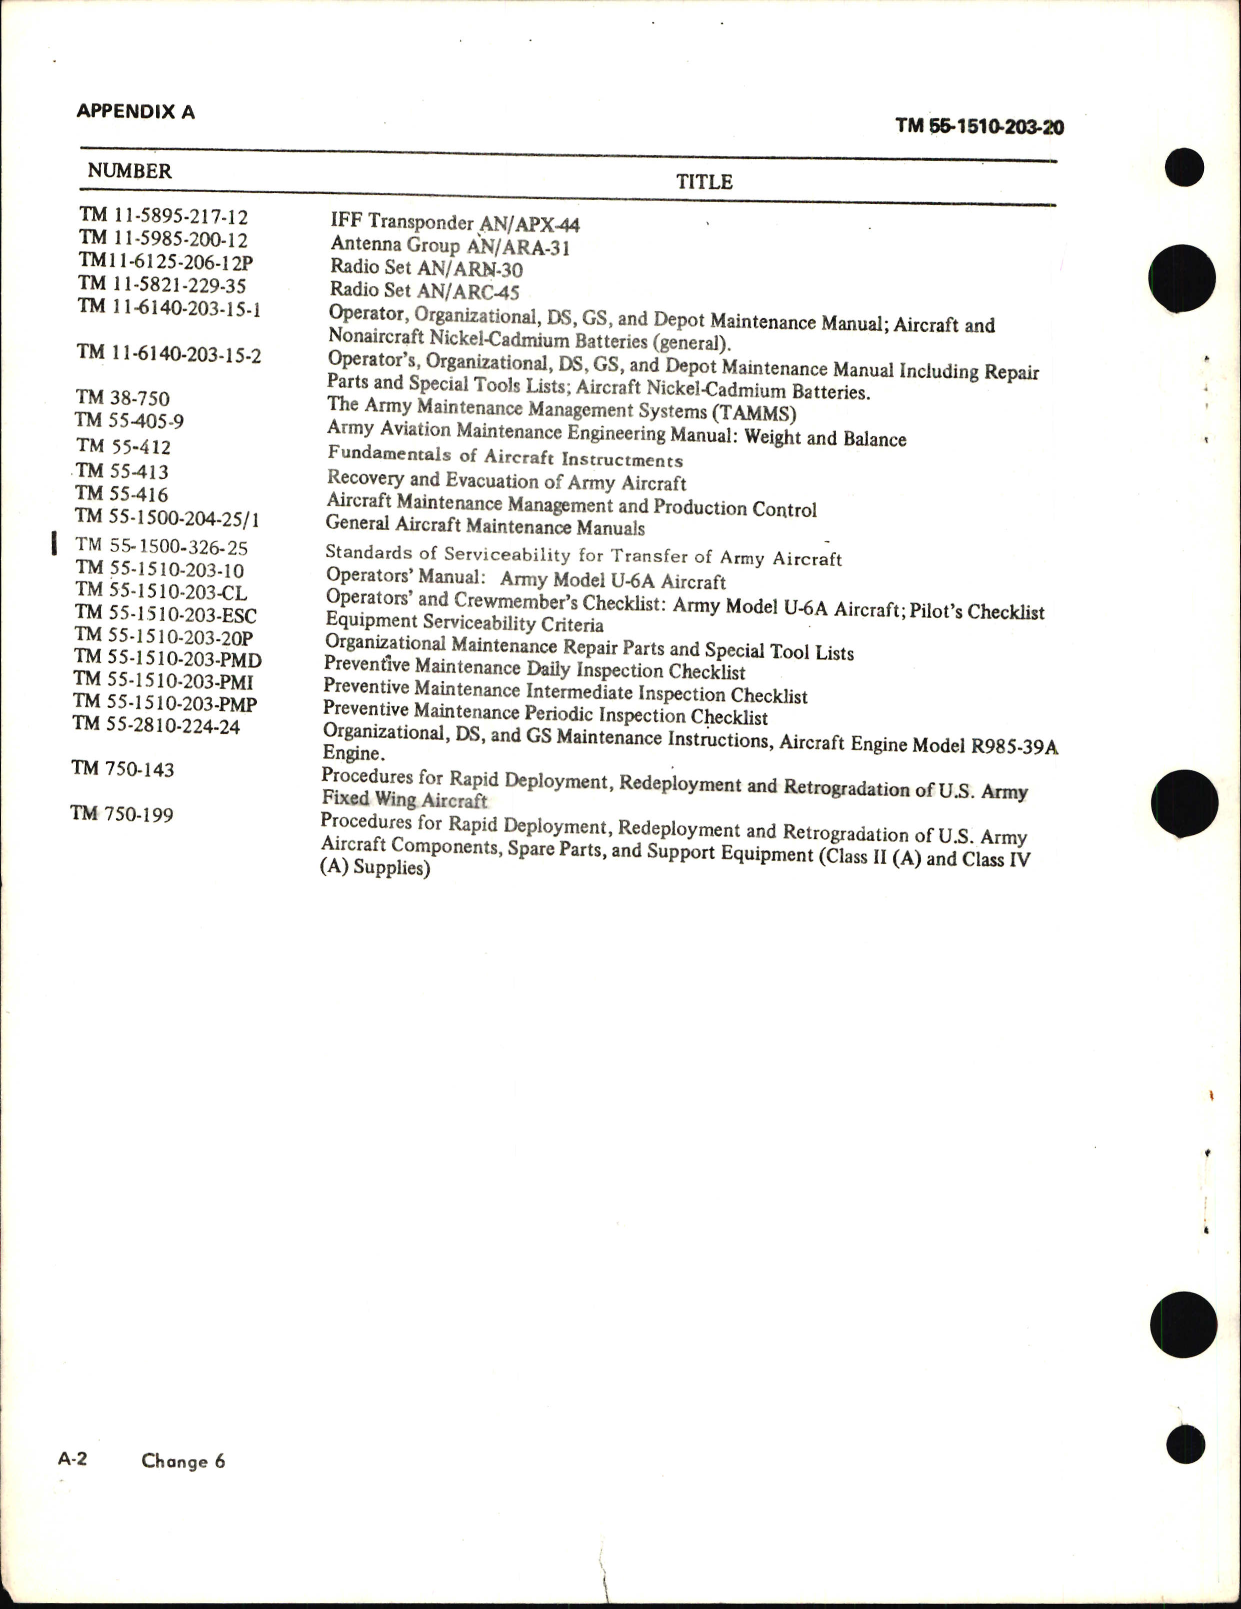 Sample page 8 from AirCorps Library document: Organizational Maintenance Manual for U-6A Aircraft